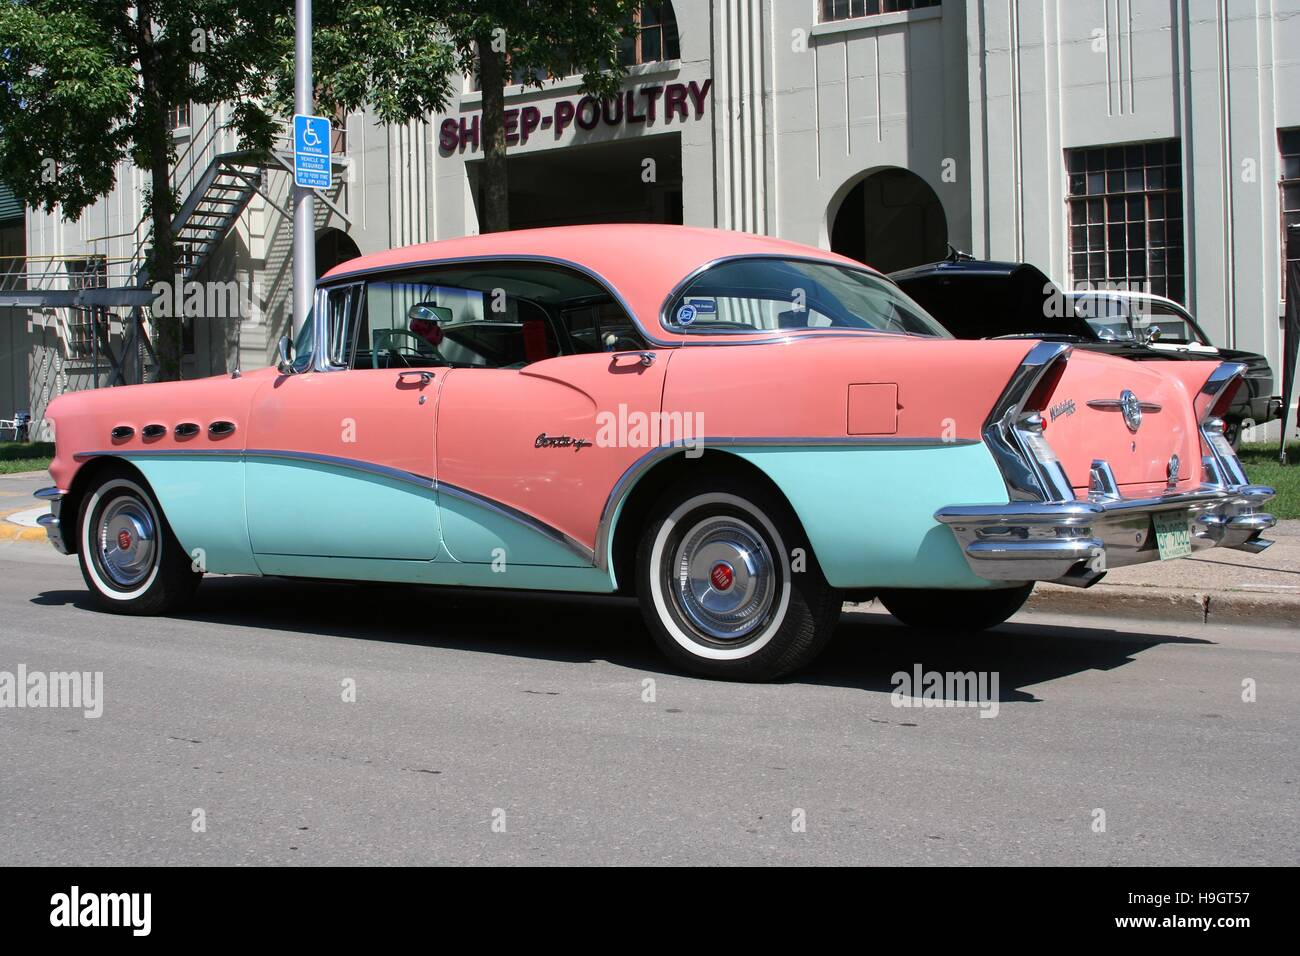 A 1956 coral pink and aqua green Buick Century Hardtop at the 'Back to the 50's Car Show' on the Minnesota State Fairgrounds Stock Photo